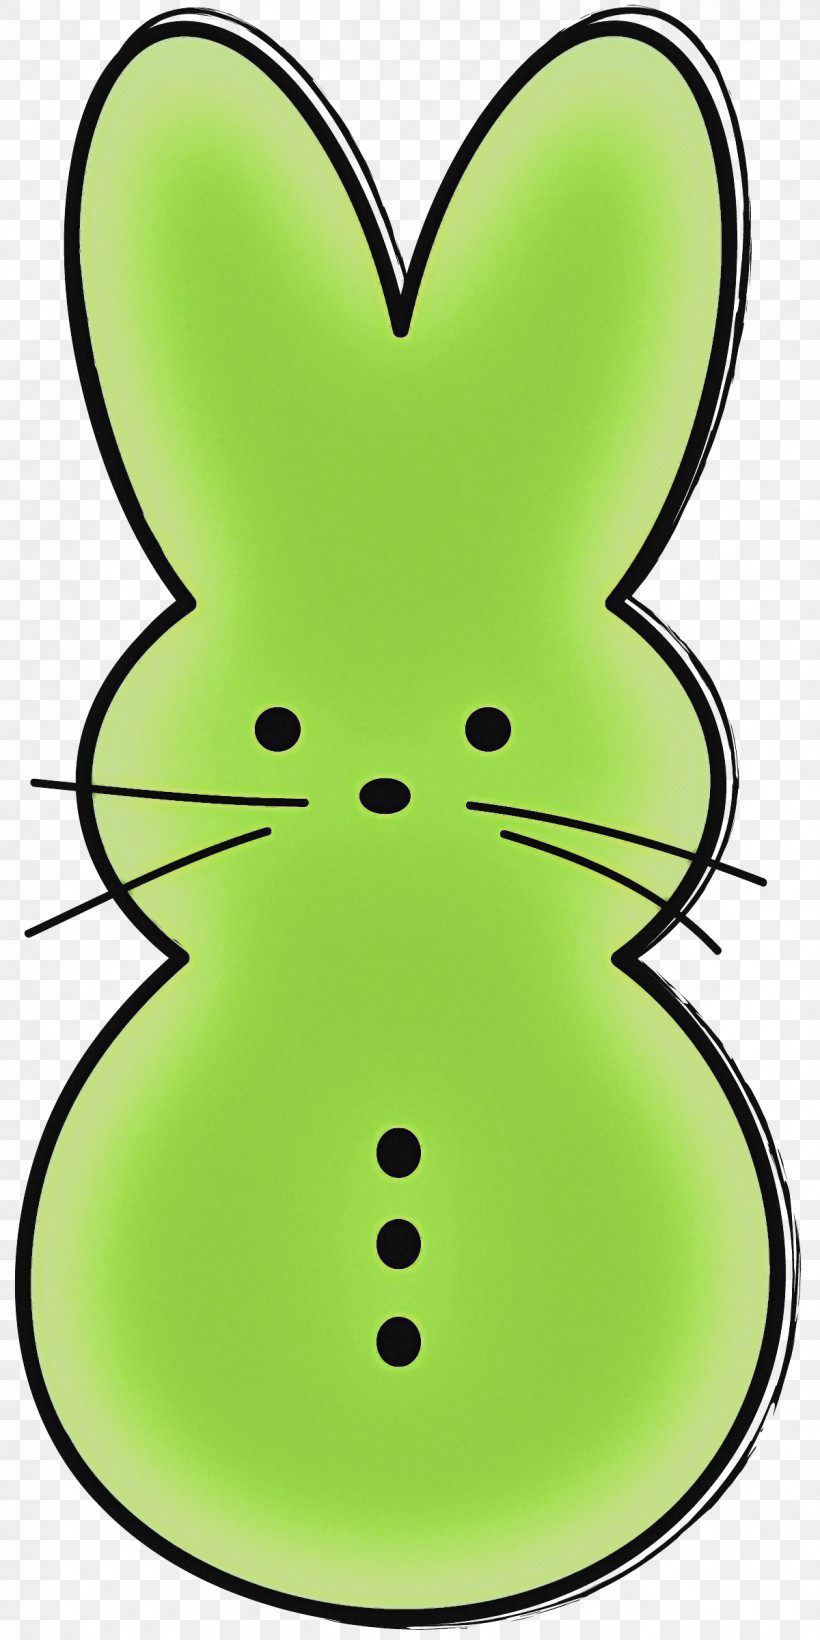 Green Cartoon Rabbits And Hares Rabbit Whiskers, PNG, 1200x2400px, Green, Cartoon, Rabbit, Rabbits And Hares, Whiskers Download Free